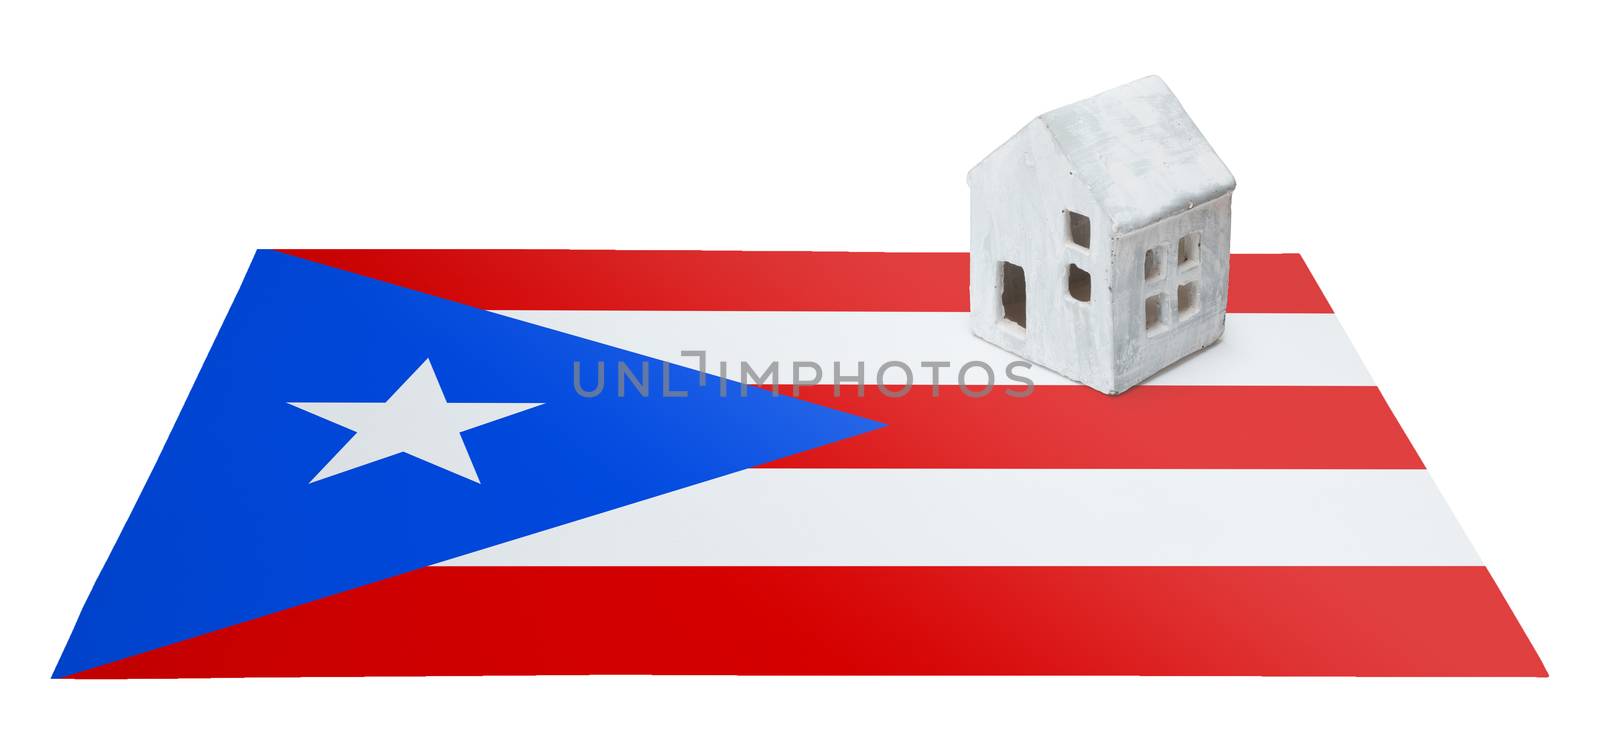 Small house on a flag - Puerto Rico by michaklootwijk